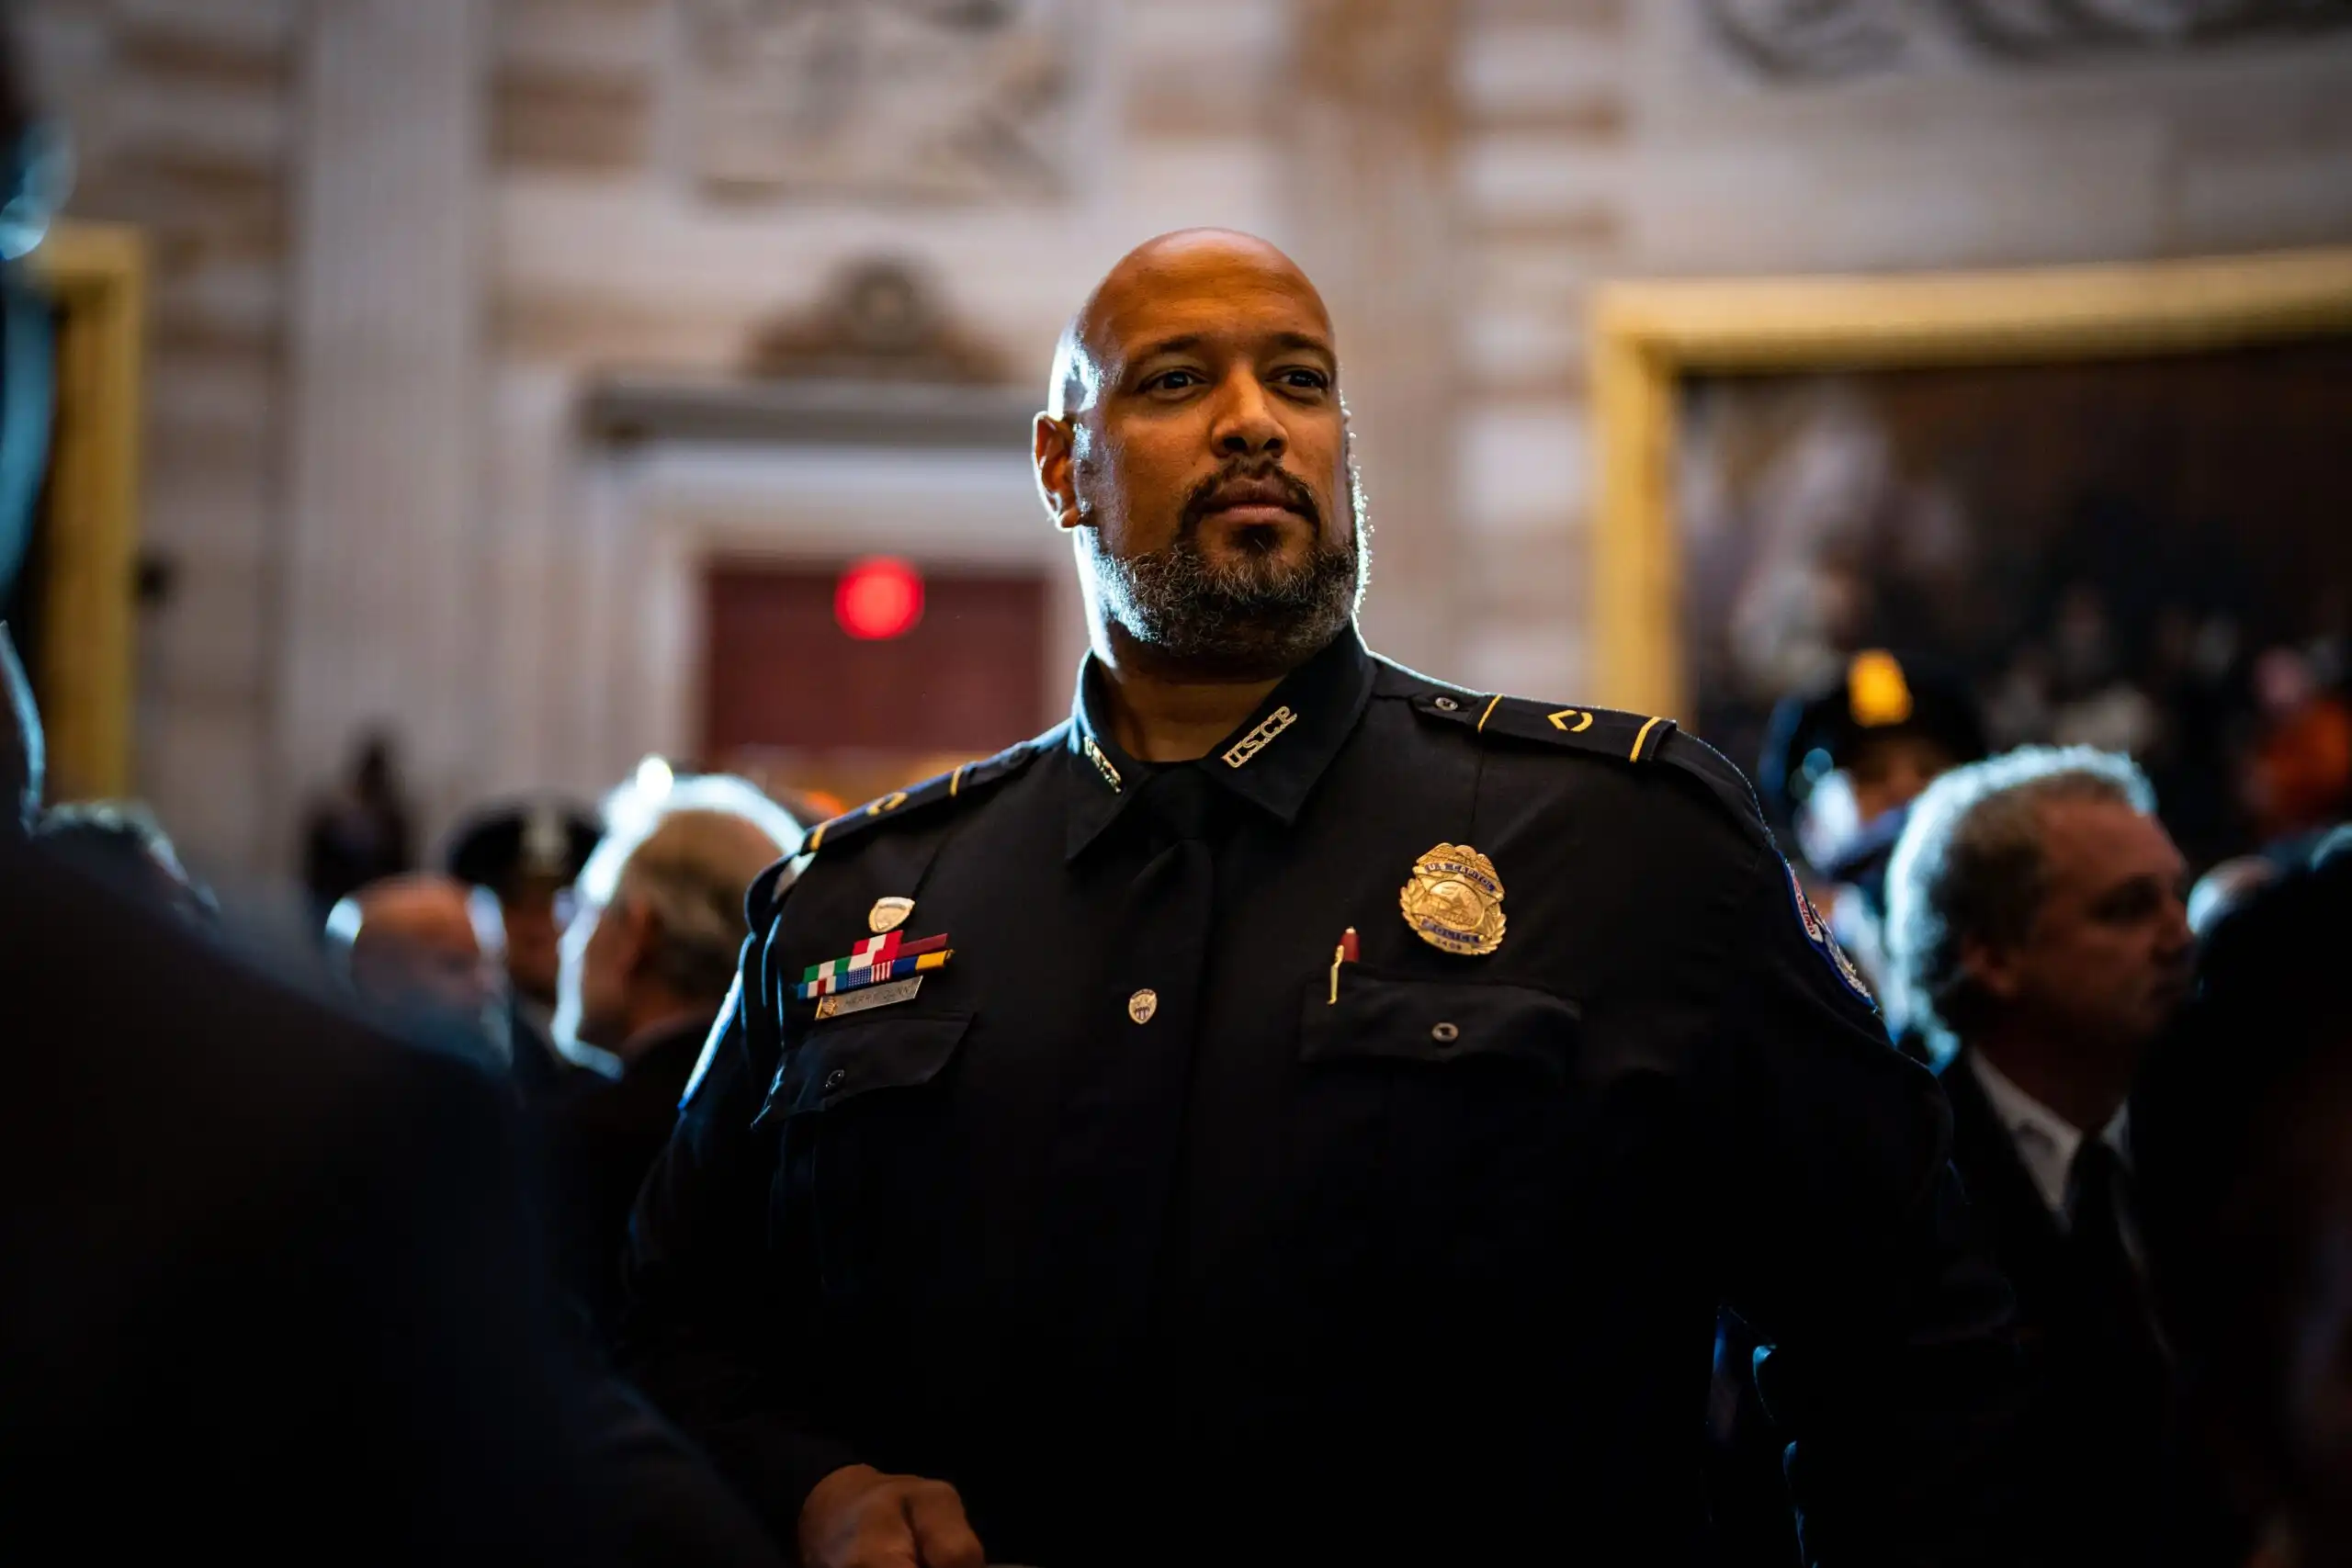 Harry Dunn, ex-Capitol police officer running for Congress to stop Trump's MAGA extremists